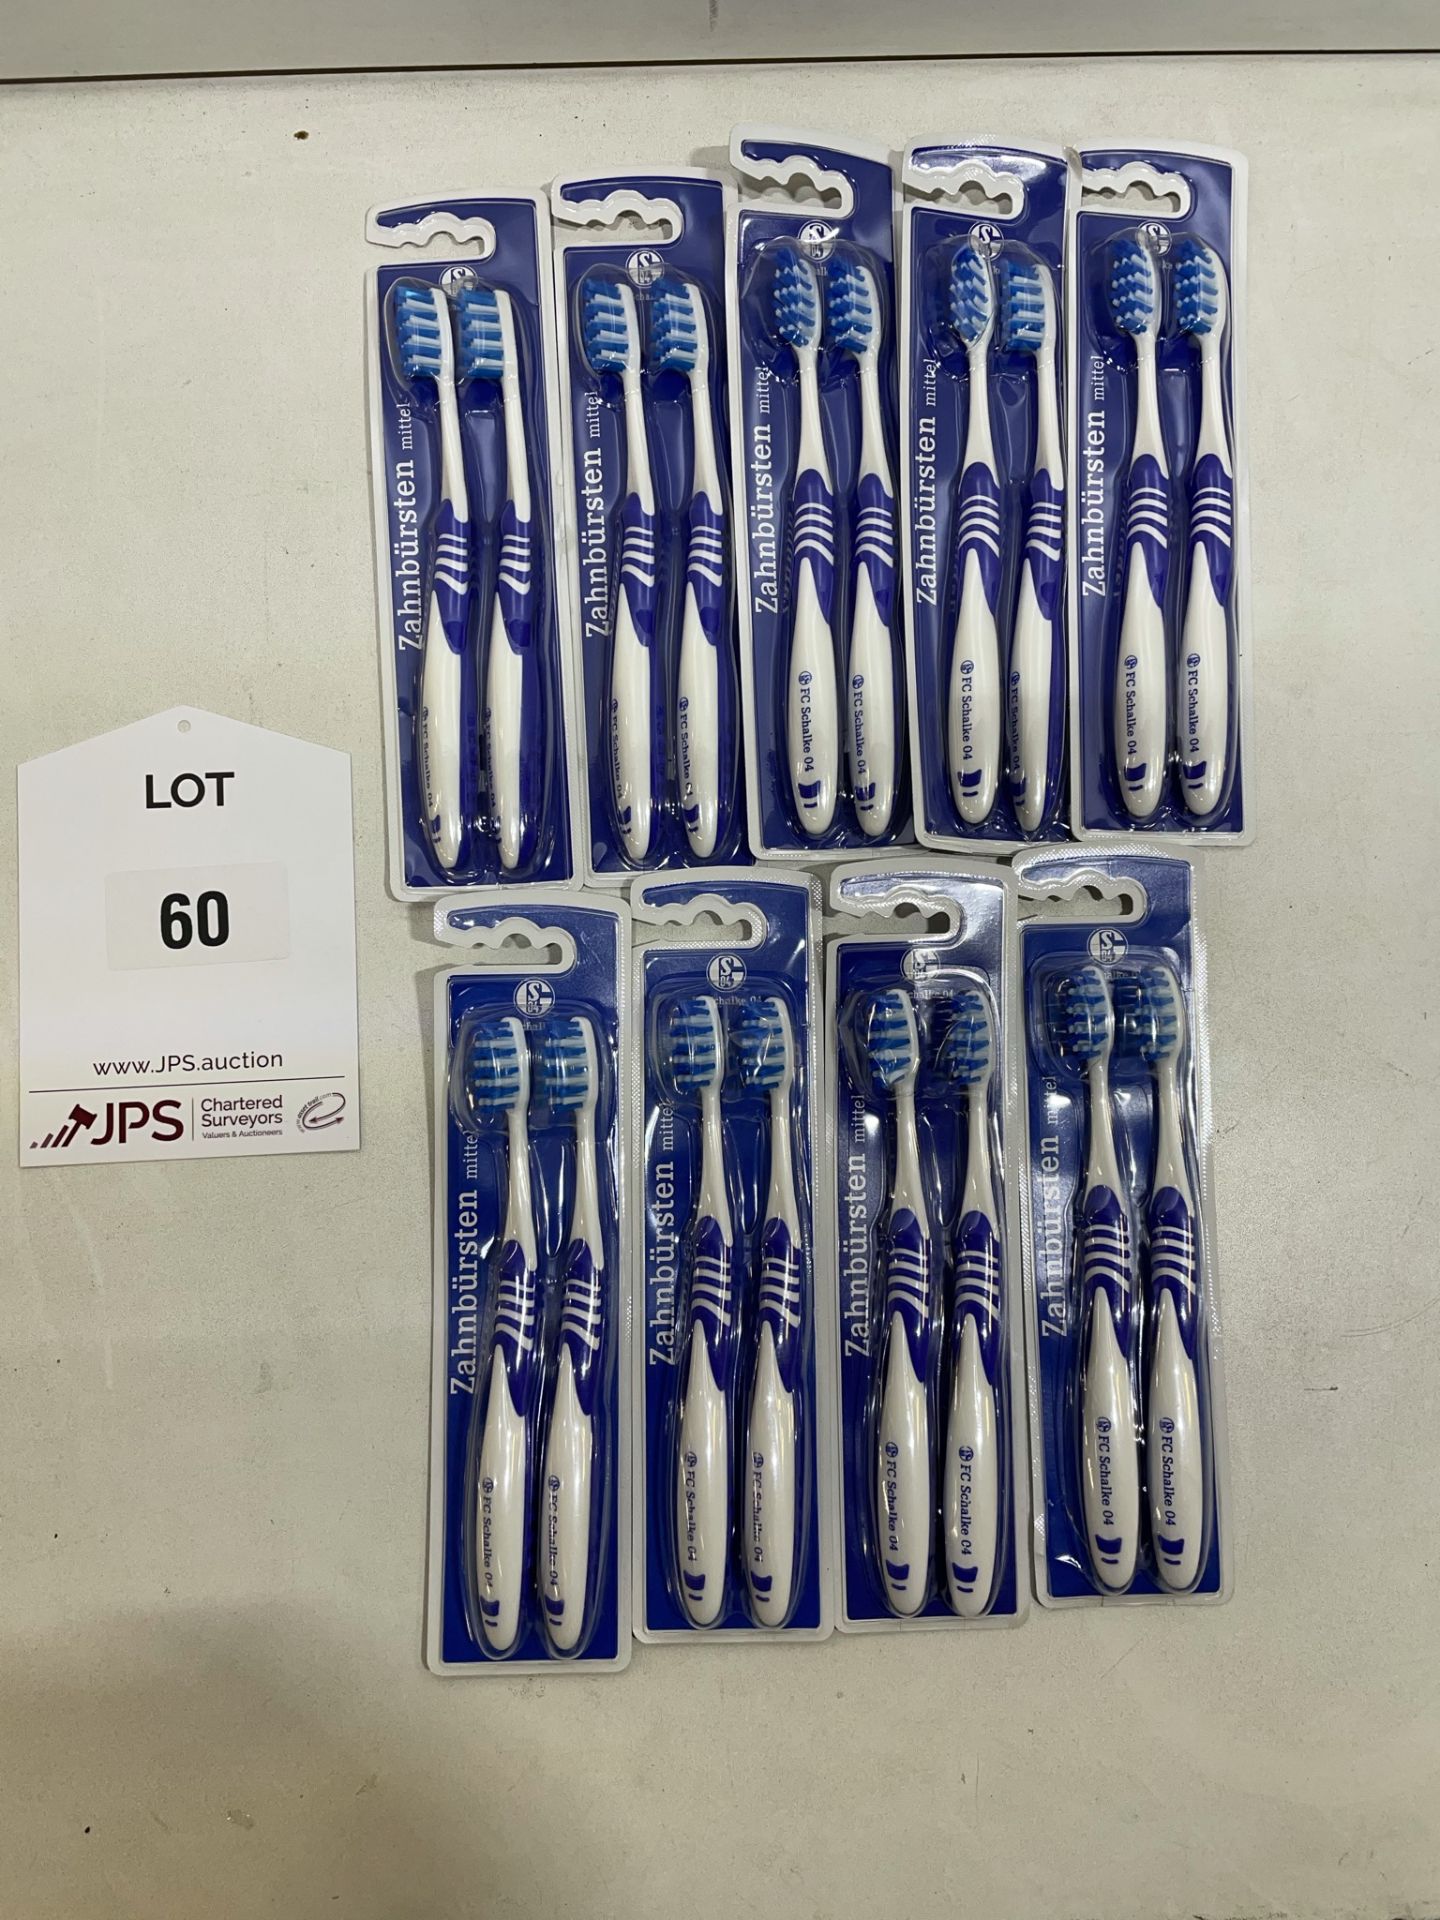 9 x Twin Pack FC Schalke 04 Toothbrushes